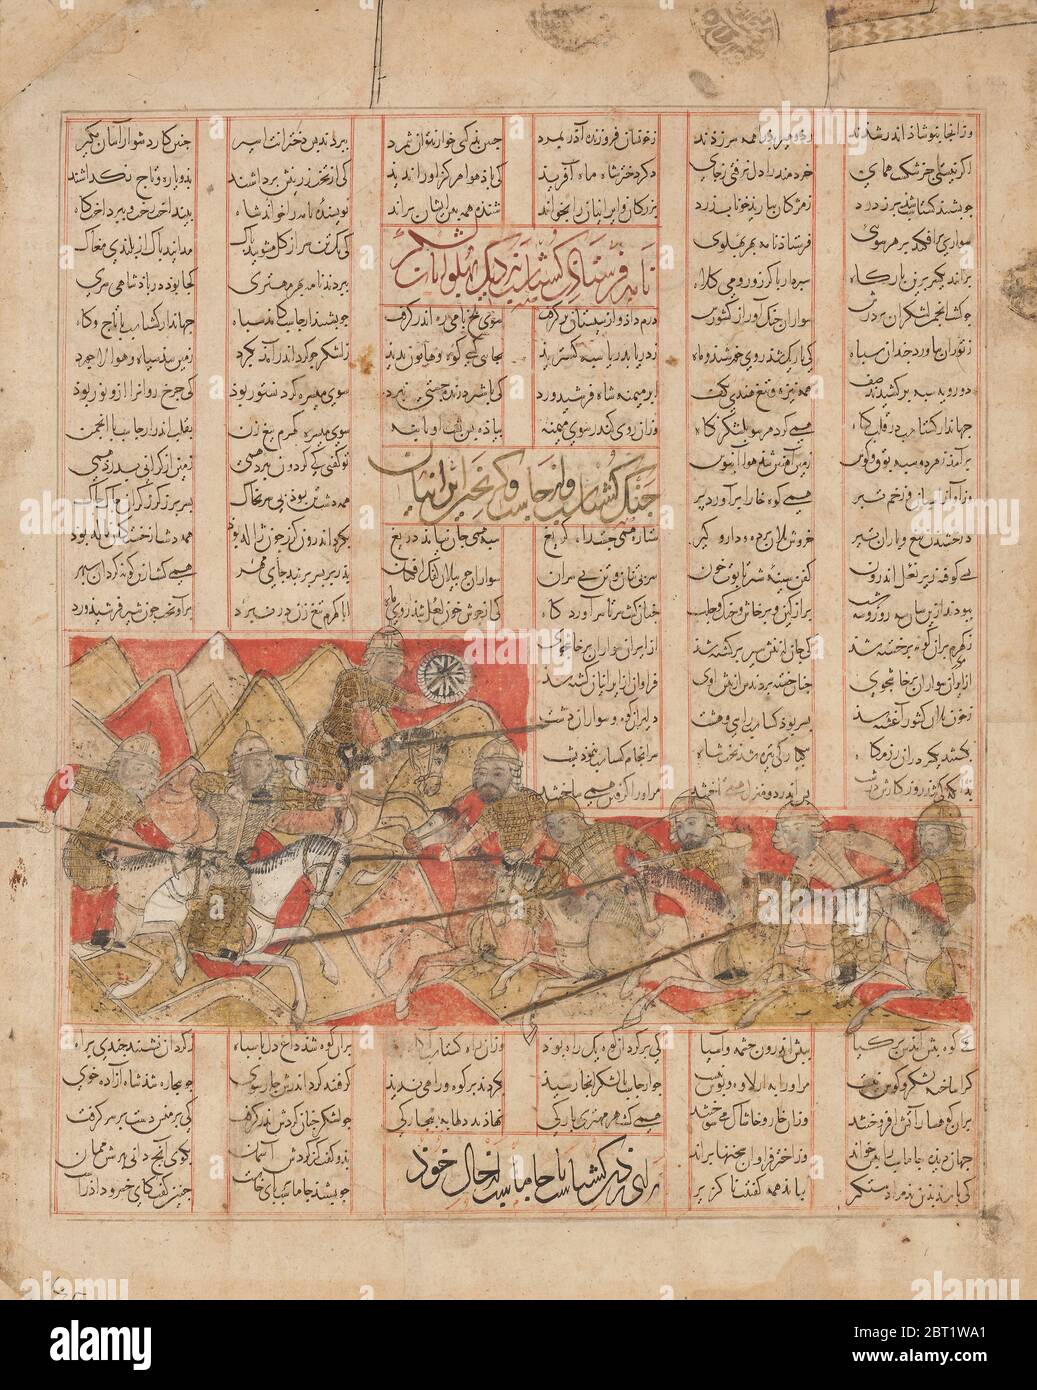 Iranian and Turanian Armies in Combat, Folio from a Shahnama (Book of Kings), dated A.H. 741/A.D. 1341. Stock Photo